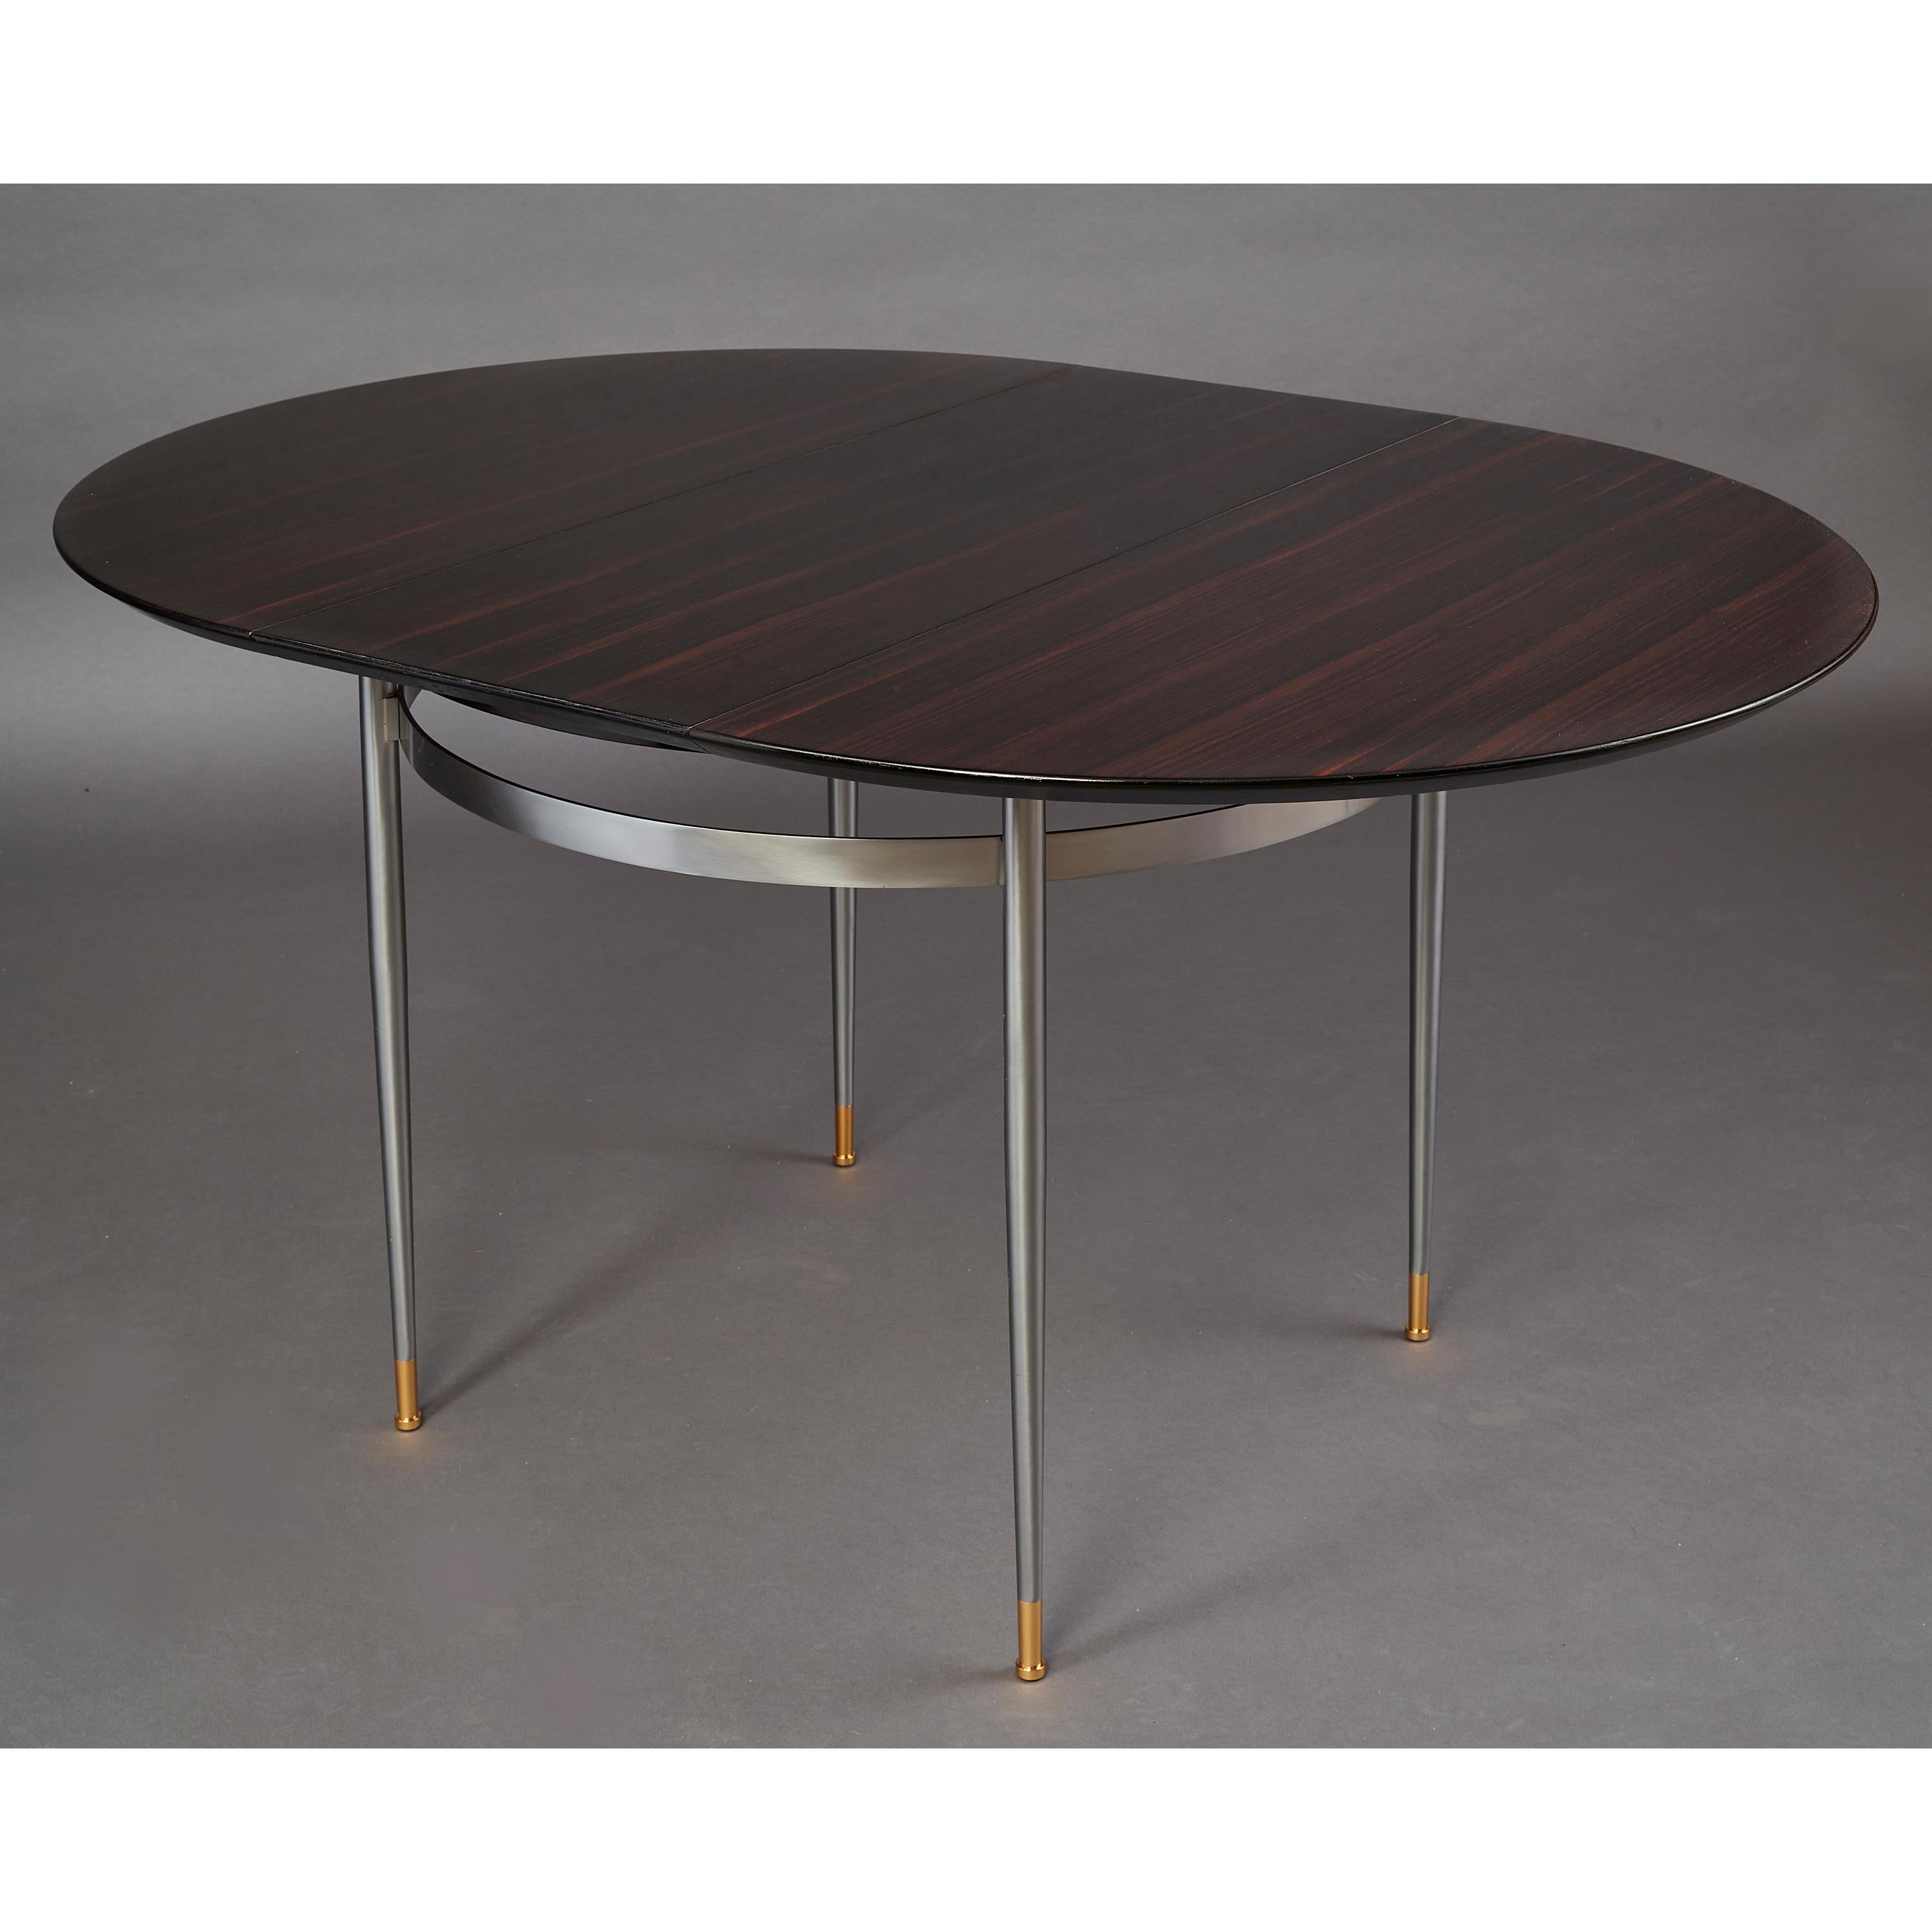 French Louis Sognot Exceptional Macassar Ebony Center or Dining Table, France, 1950s